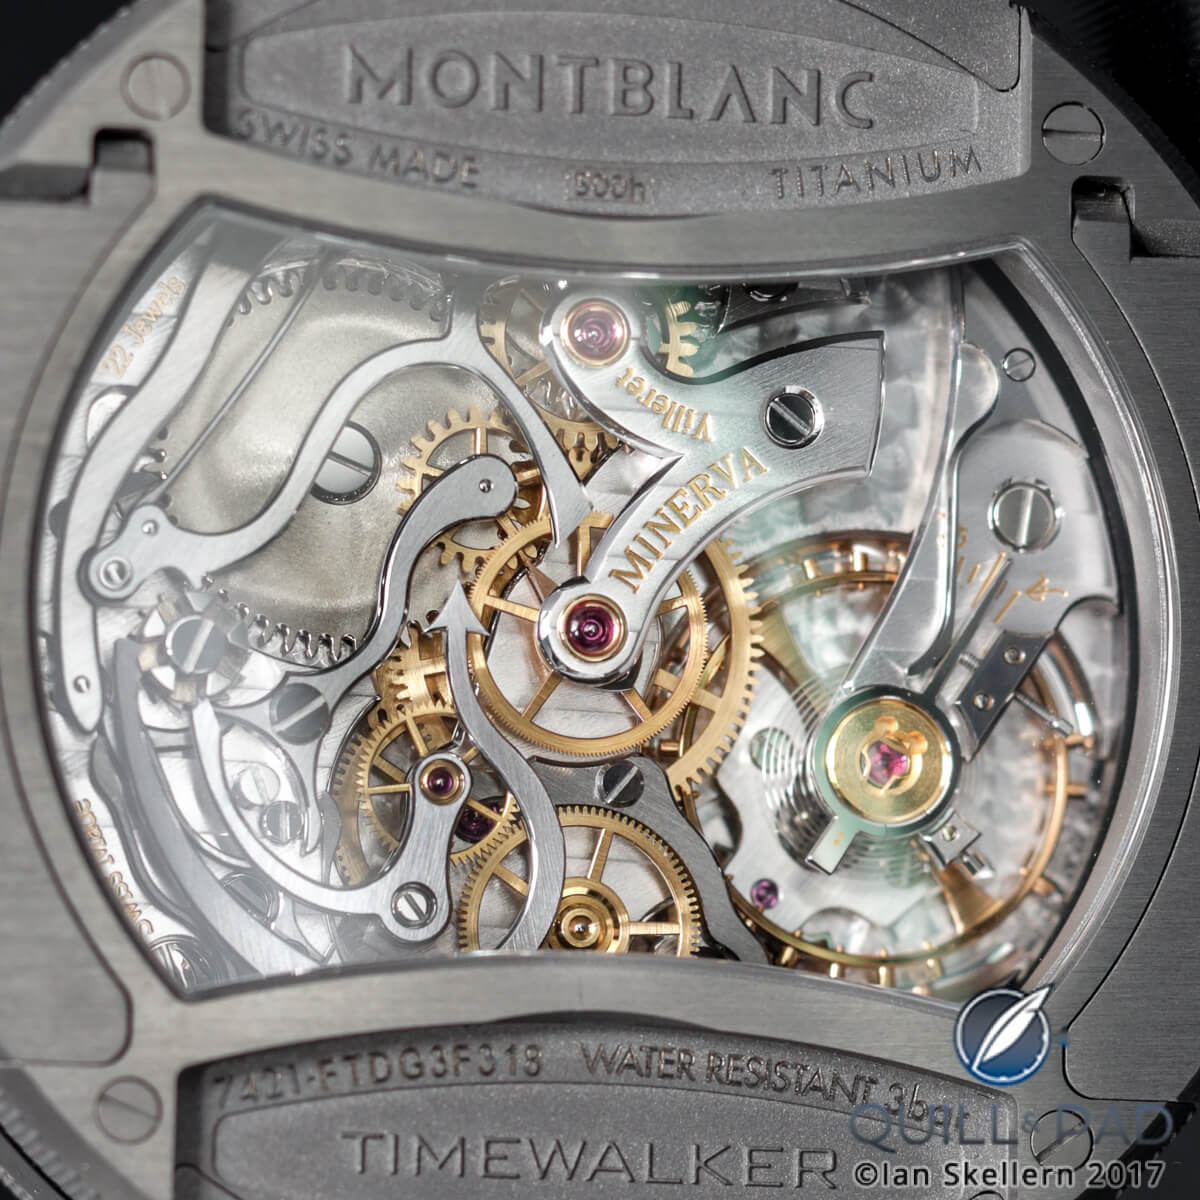 Movement side of the Montblanc Timewalker Chronograph Rally Timer Counter Limited Edition 100